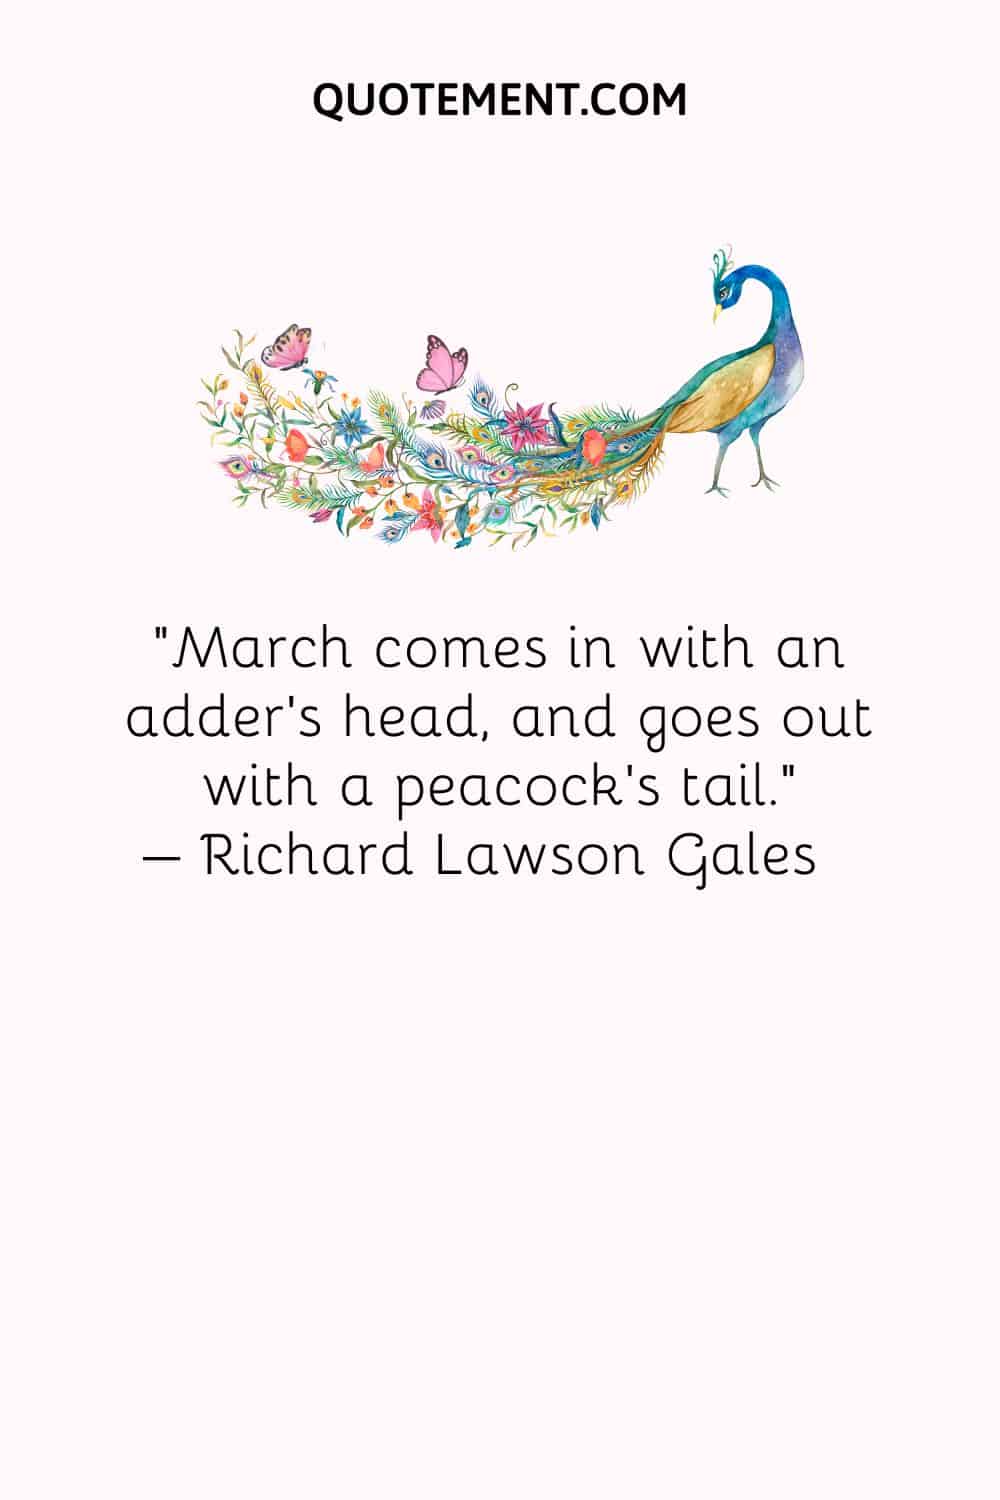 March comes in with an adder’s head, and goes out with a peacock’s tail. – Richard Lawson Gales